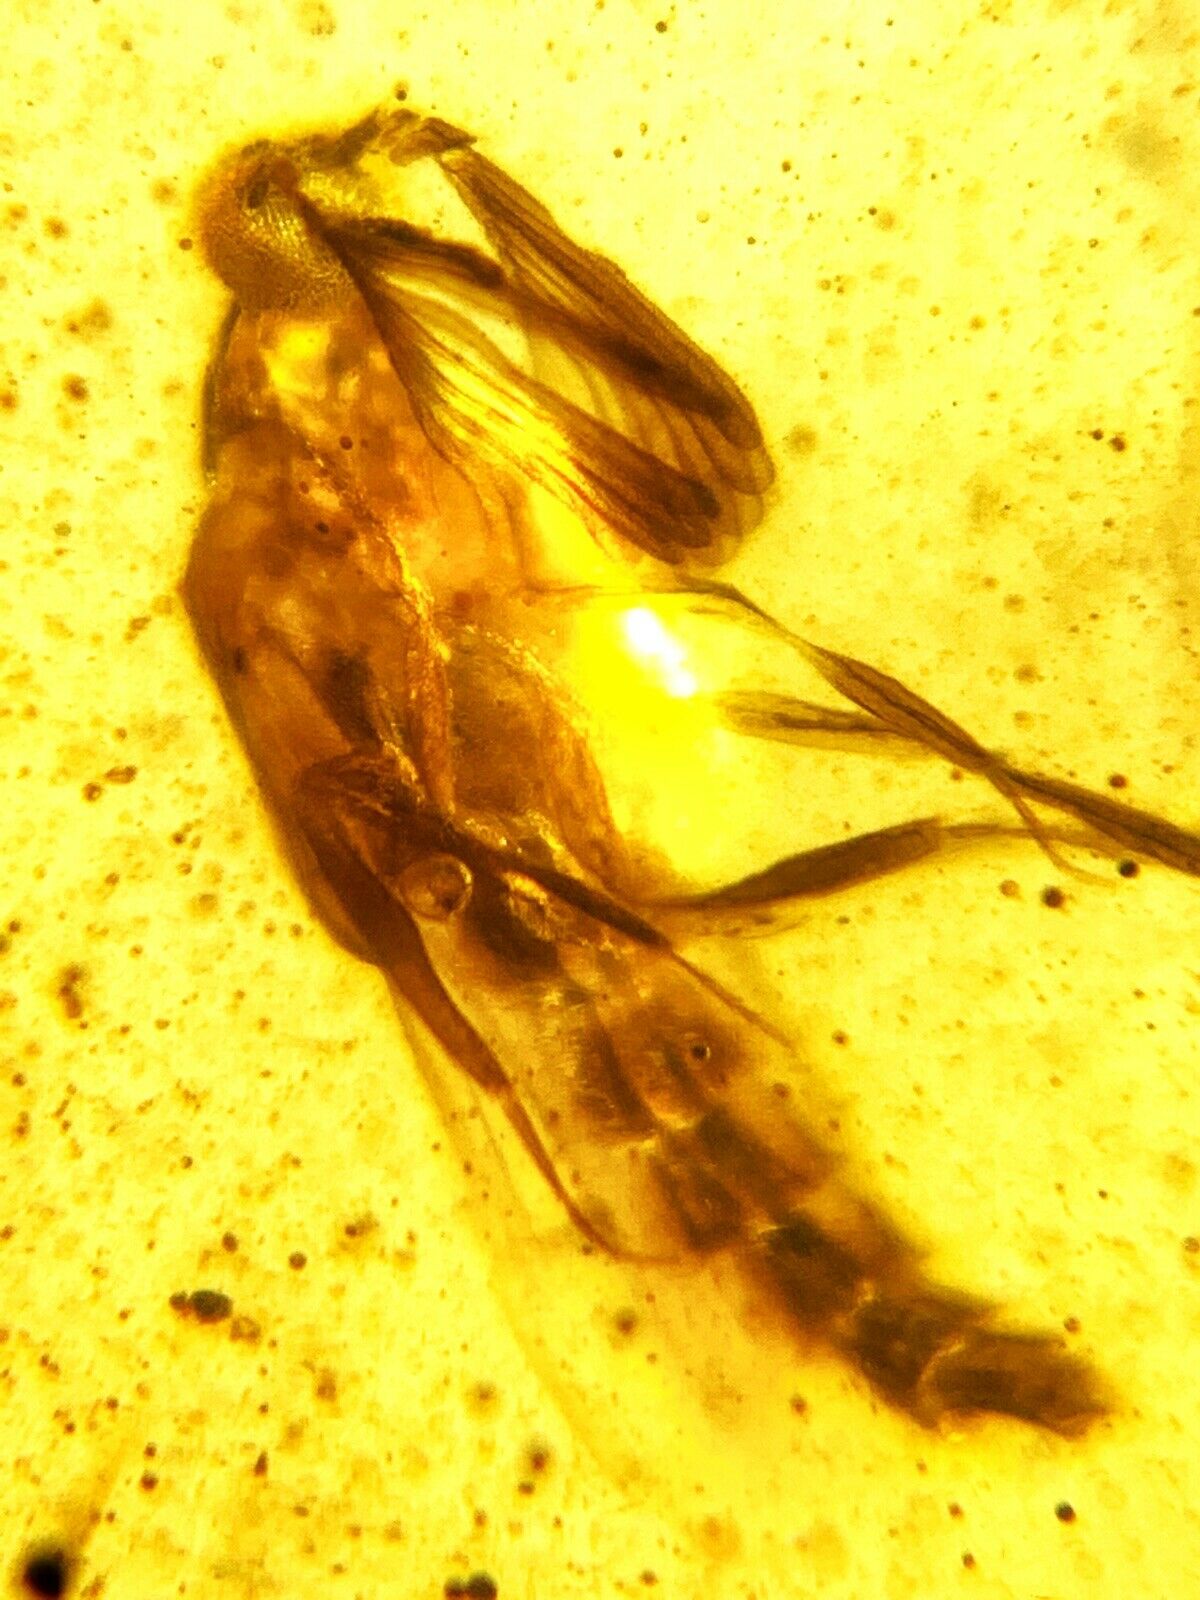 Dinosaur age Burmite AMBER with a Rare Pristine PARASITOID BEETLE RIPIPHORIDAE! TESTED FOR AUTHENTICITY!!